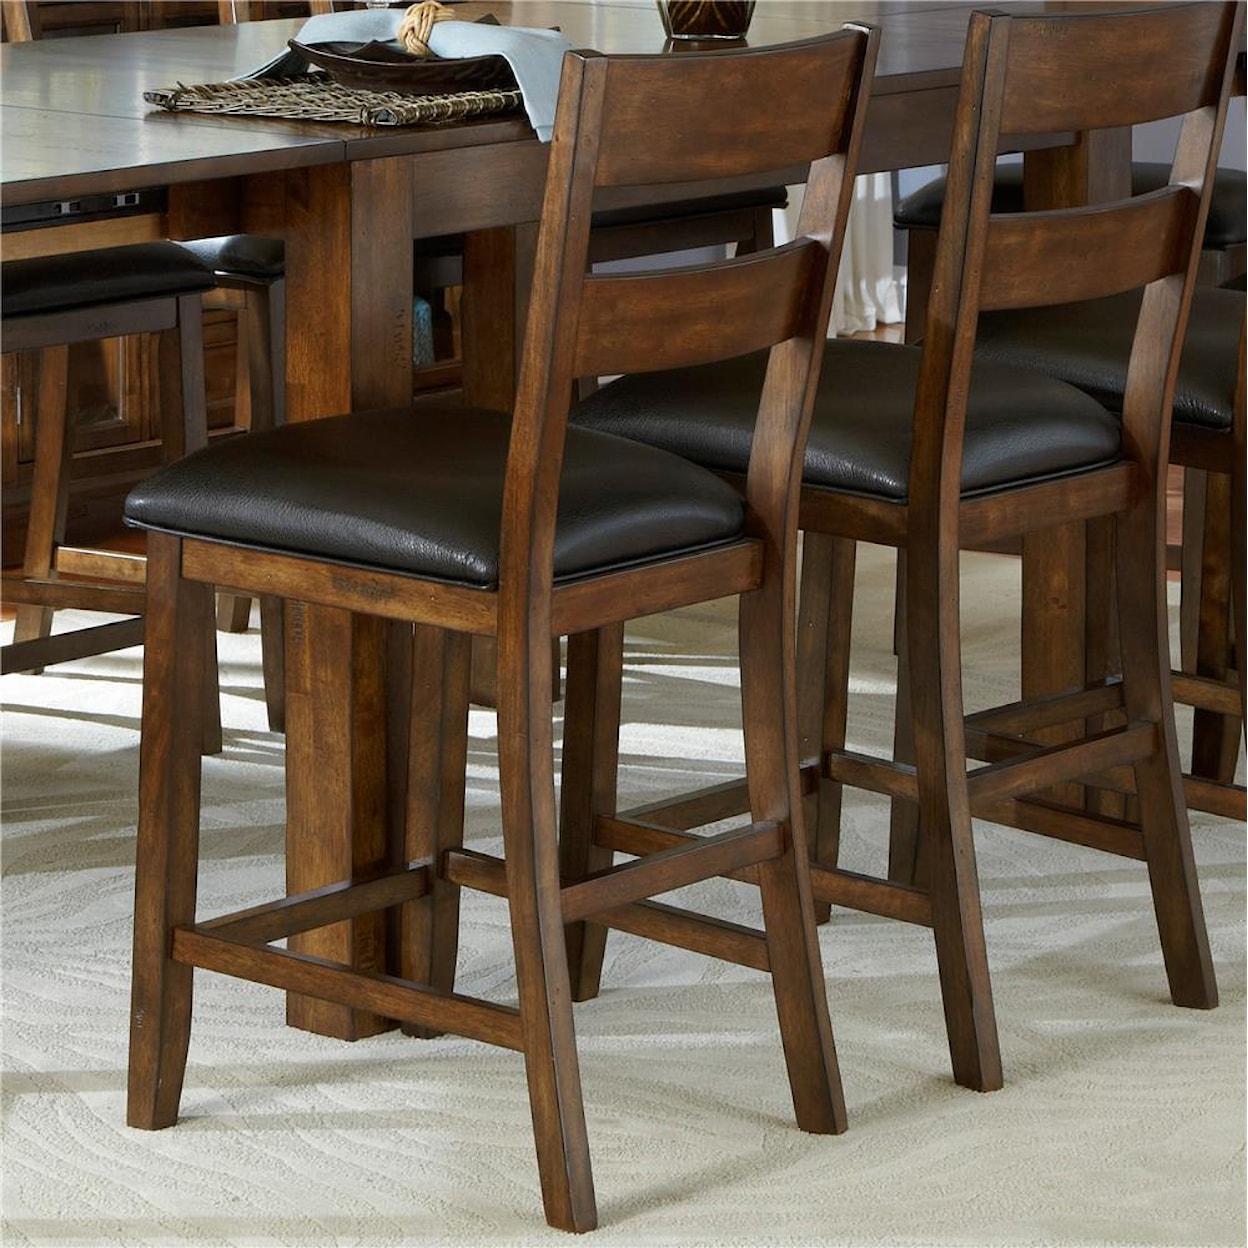 AAmerica Mariposa 7 Piece Counter Height Dining Room